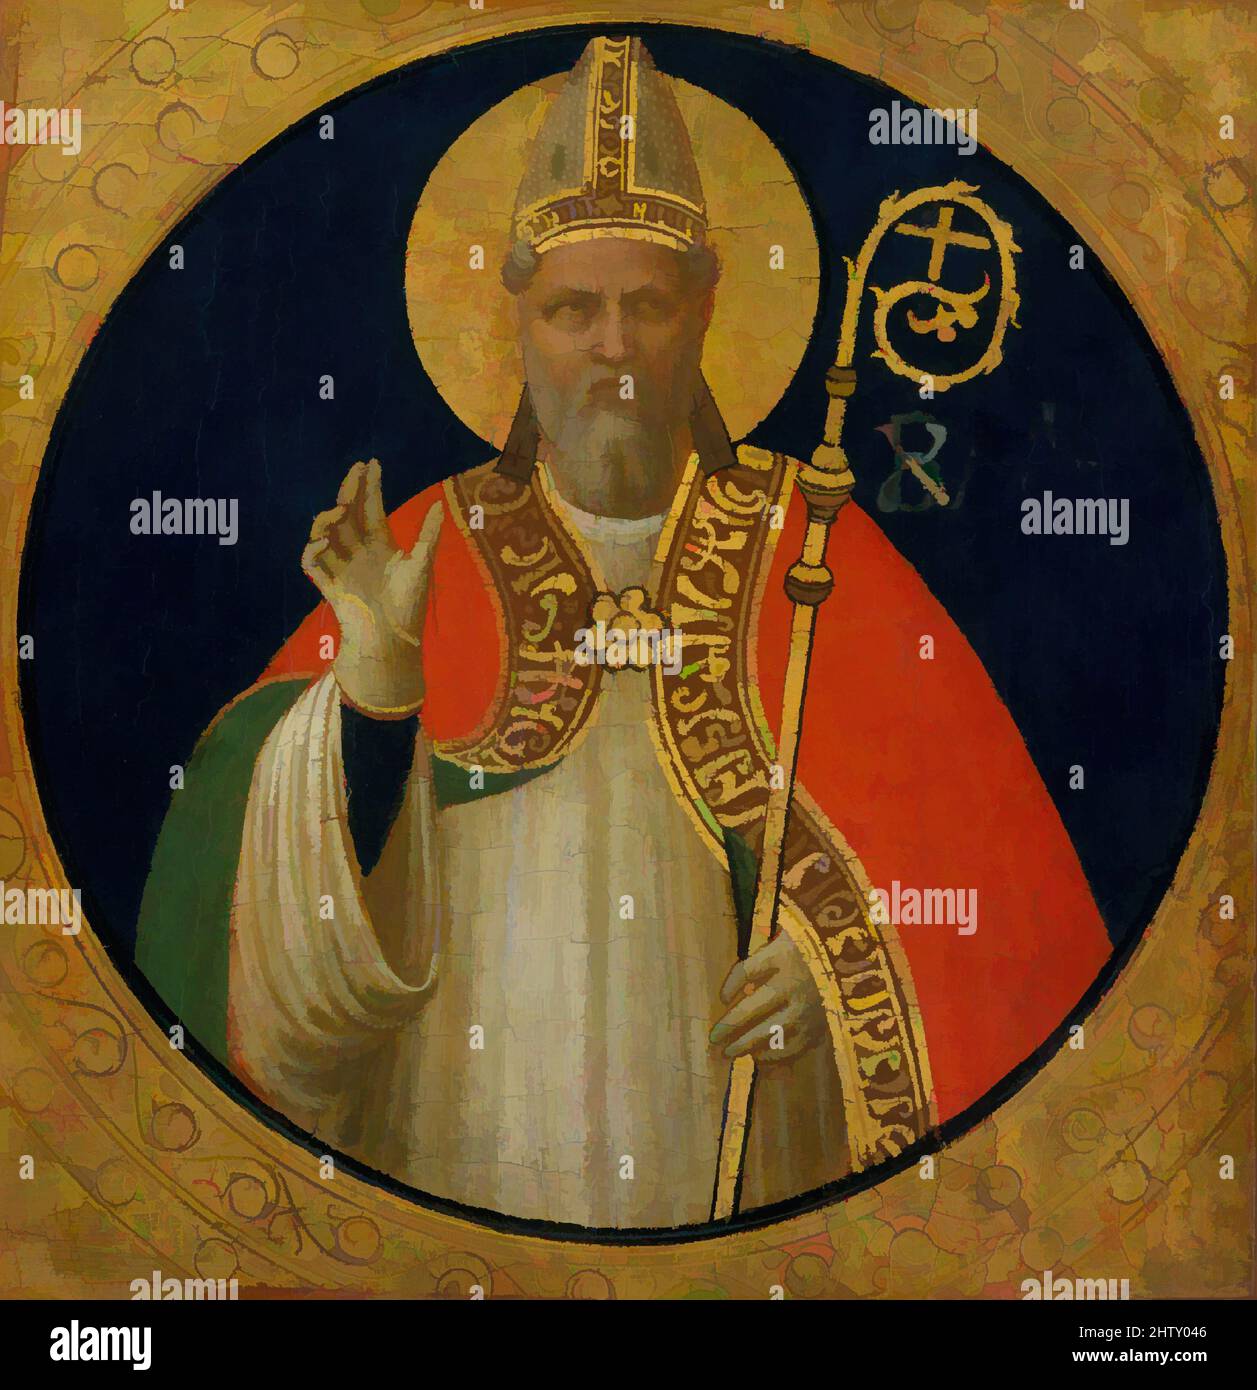 Art inspired by A Bishop Saint, ca. 1425, Tempera on wood, gold ground, Overall 6 1/4 x 6 1/8 in. (15.9 x 15.6 cm); diameter of roundel 5 7/8 in. (14.9 cm), Paintings, Fra Angelico (Guido di Pietro) (Italian, Vicchio di Mugello ca. 1395–1455 Rome), This early work by Fra Angelico dates, Classic works modernized by Artotop with a splash of modernity. Shapes, color and value, eye-catching visual impact on art. Emotions through freedom of artworks in a contemporary way. A timeless message pursuing a wildly creative new direction. Artists turning to the digital medium and creating the Artotop NFT Stock Photo